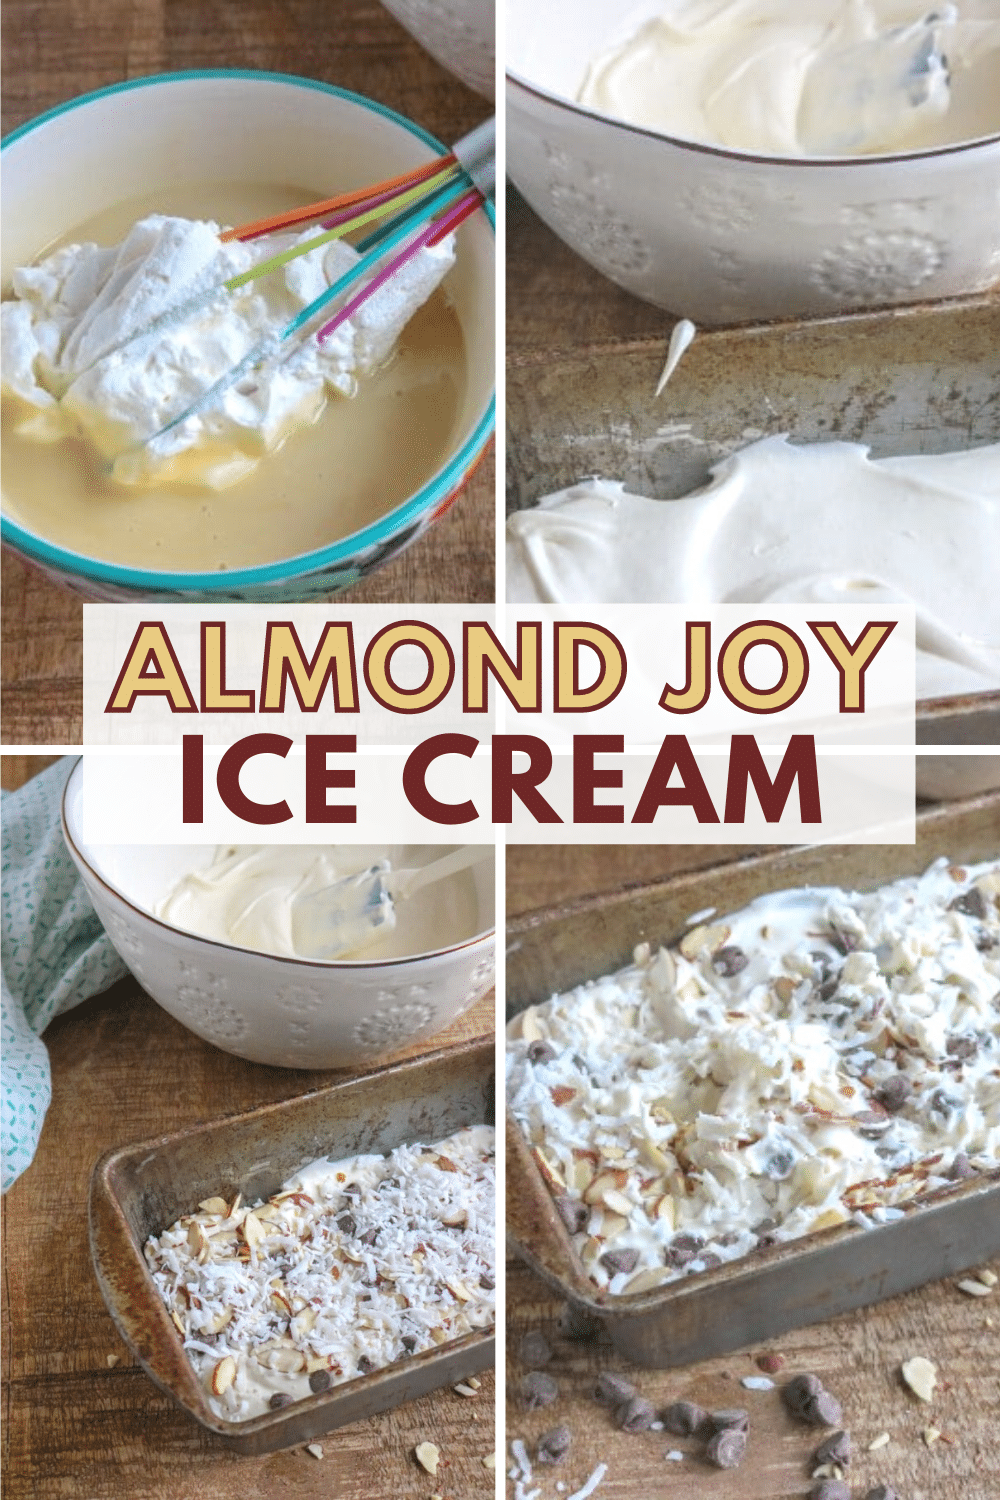 This Easy Homemade Almond Joy Ice Cream recipe is a delicious combination of two desserts. It's perfect for anyone who loves Almond Joy and ice cream! #almondjoy #icecream #dessert via @wondermomwannab